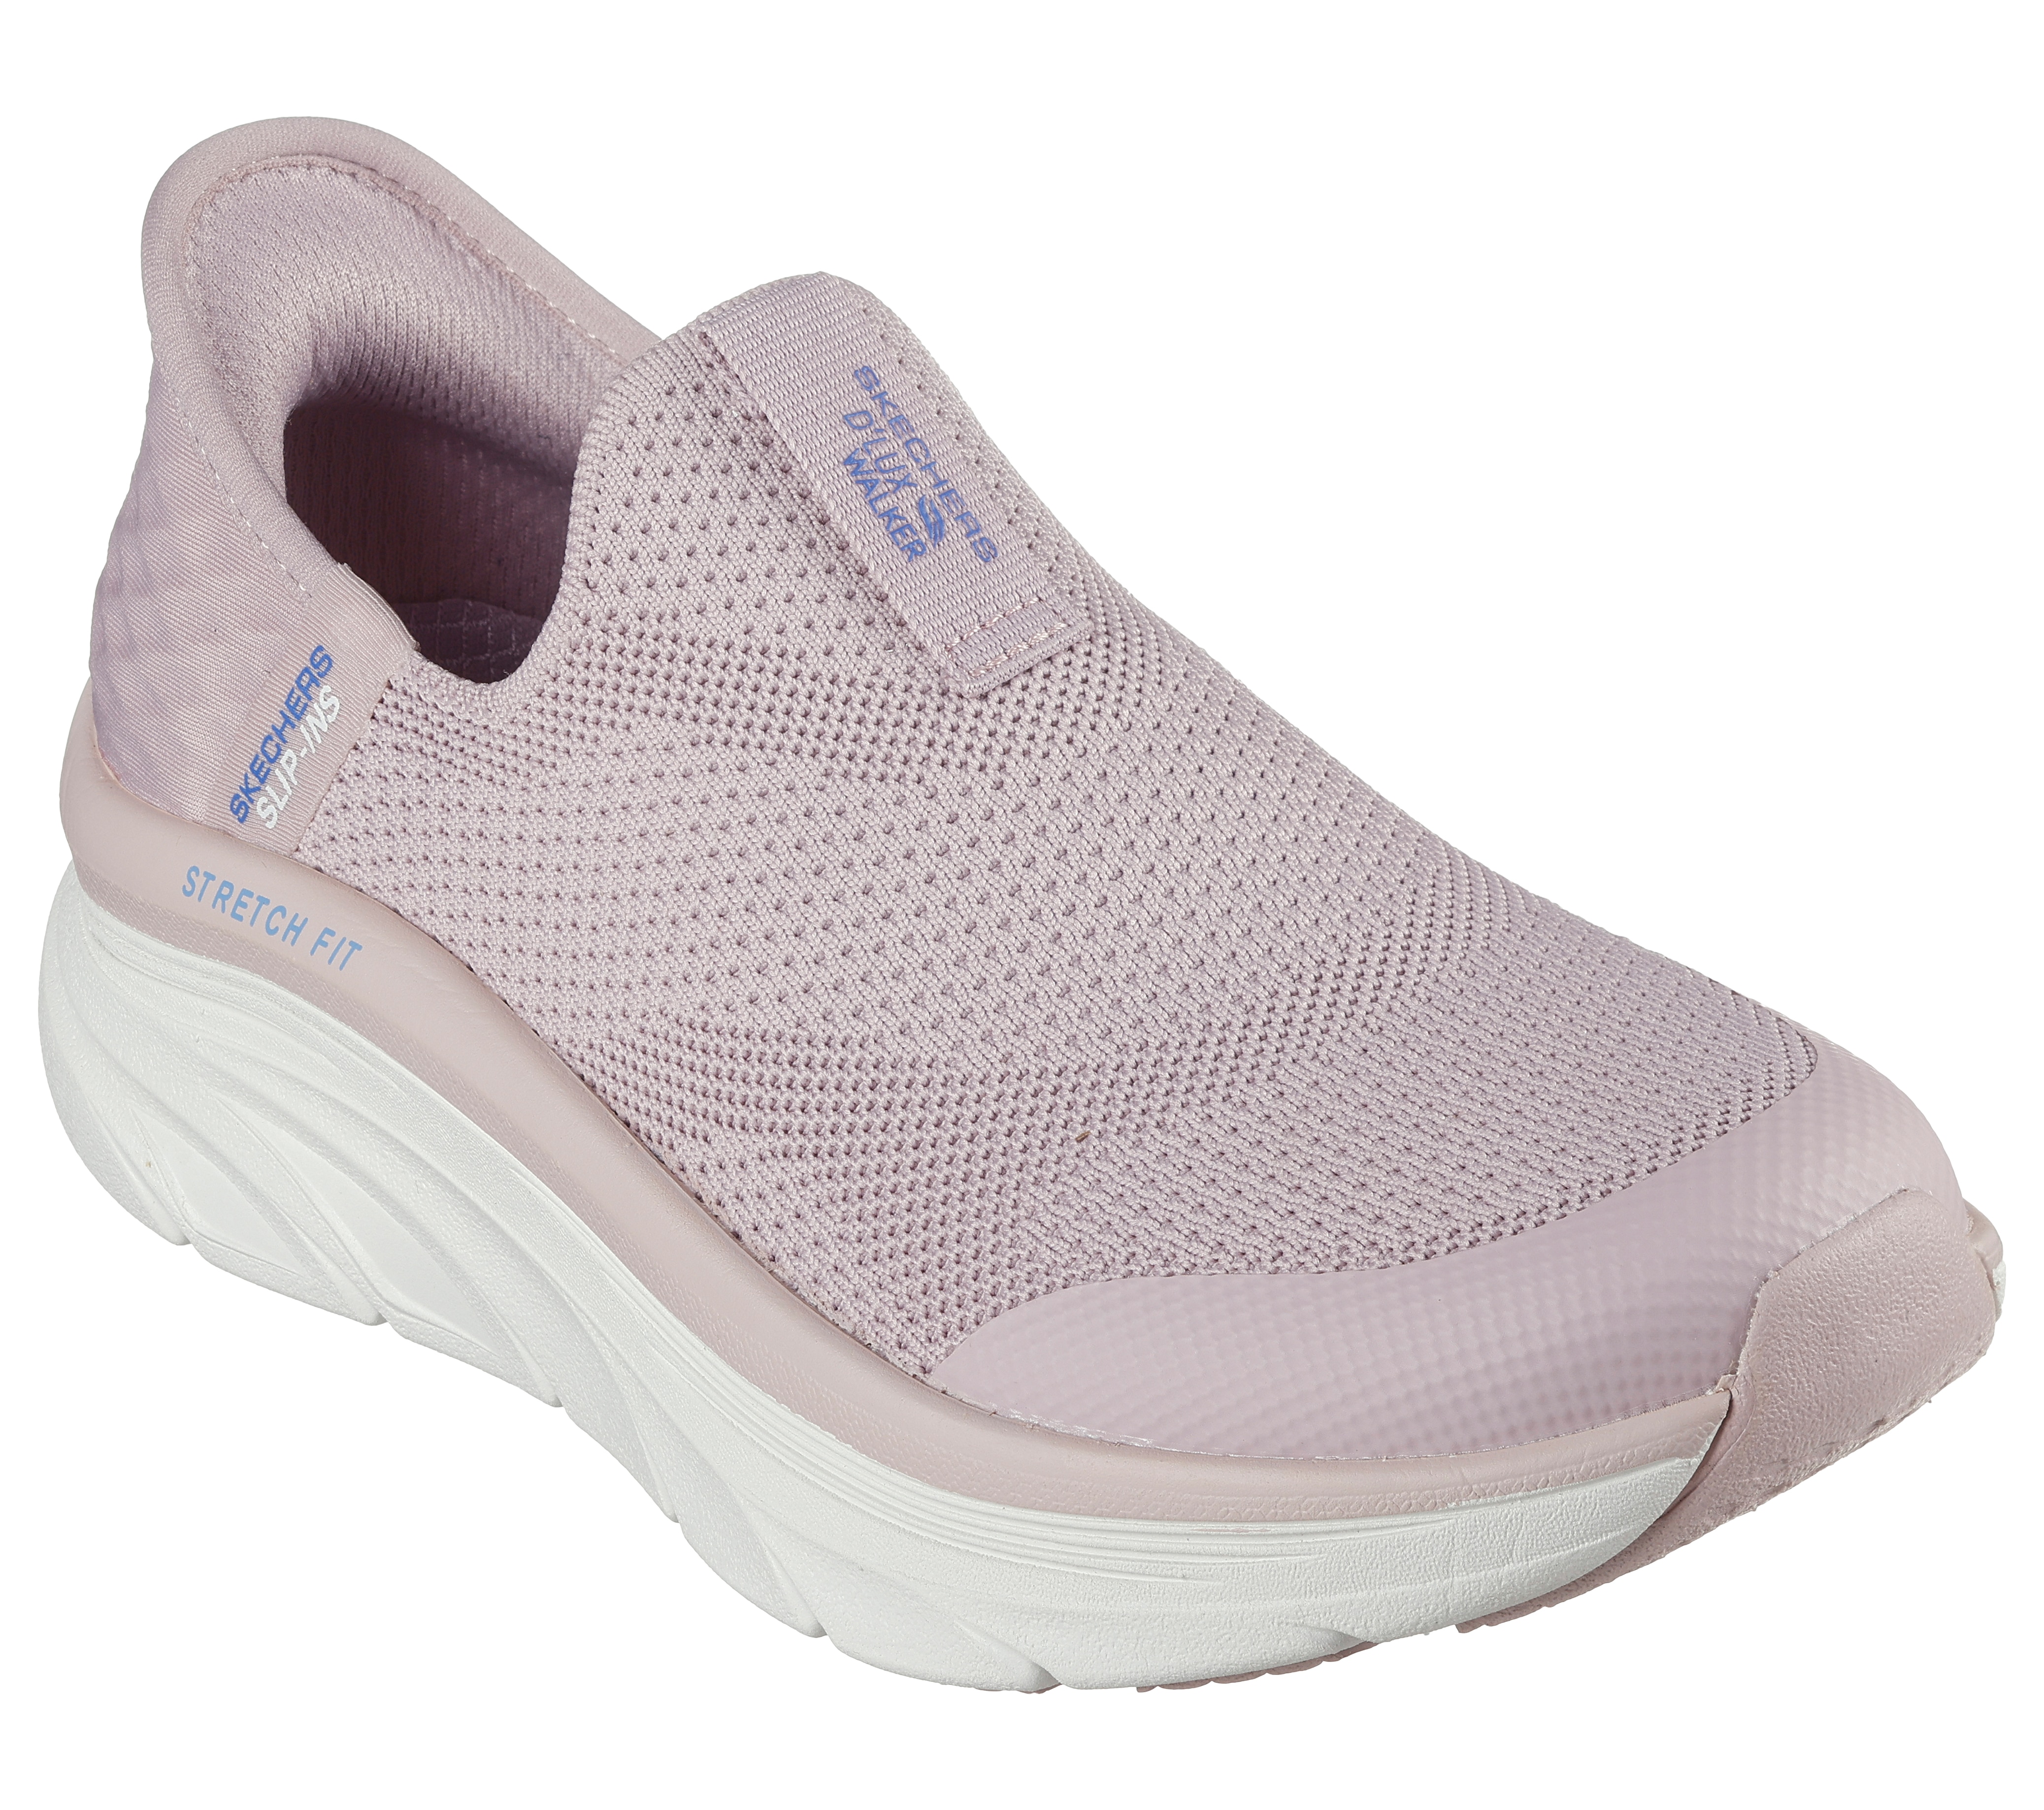 Clothing & Shoes - Shoes - Sneakers - Skechers D'Lux Walker 